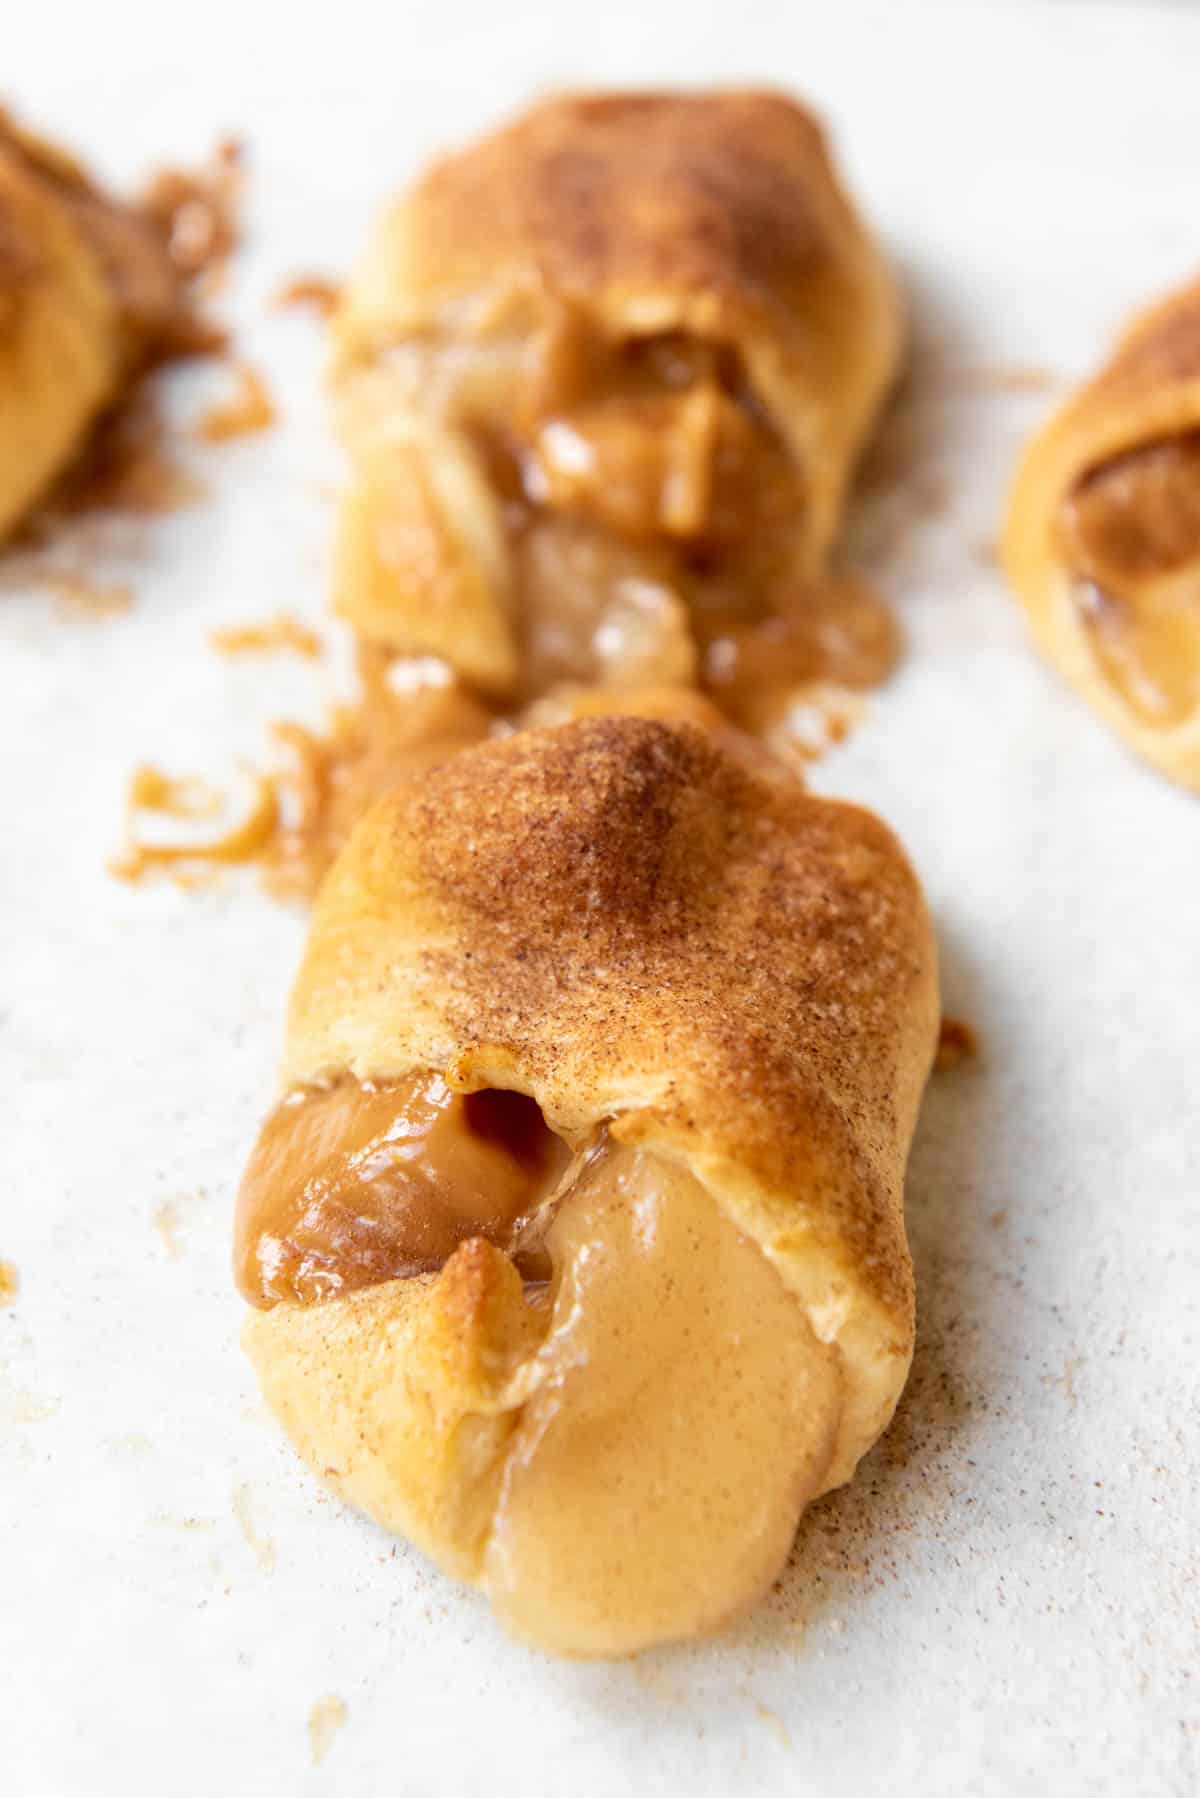 A side angle of apple slices and caramel spilling out of a baked Pillsbury crescent roll.